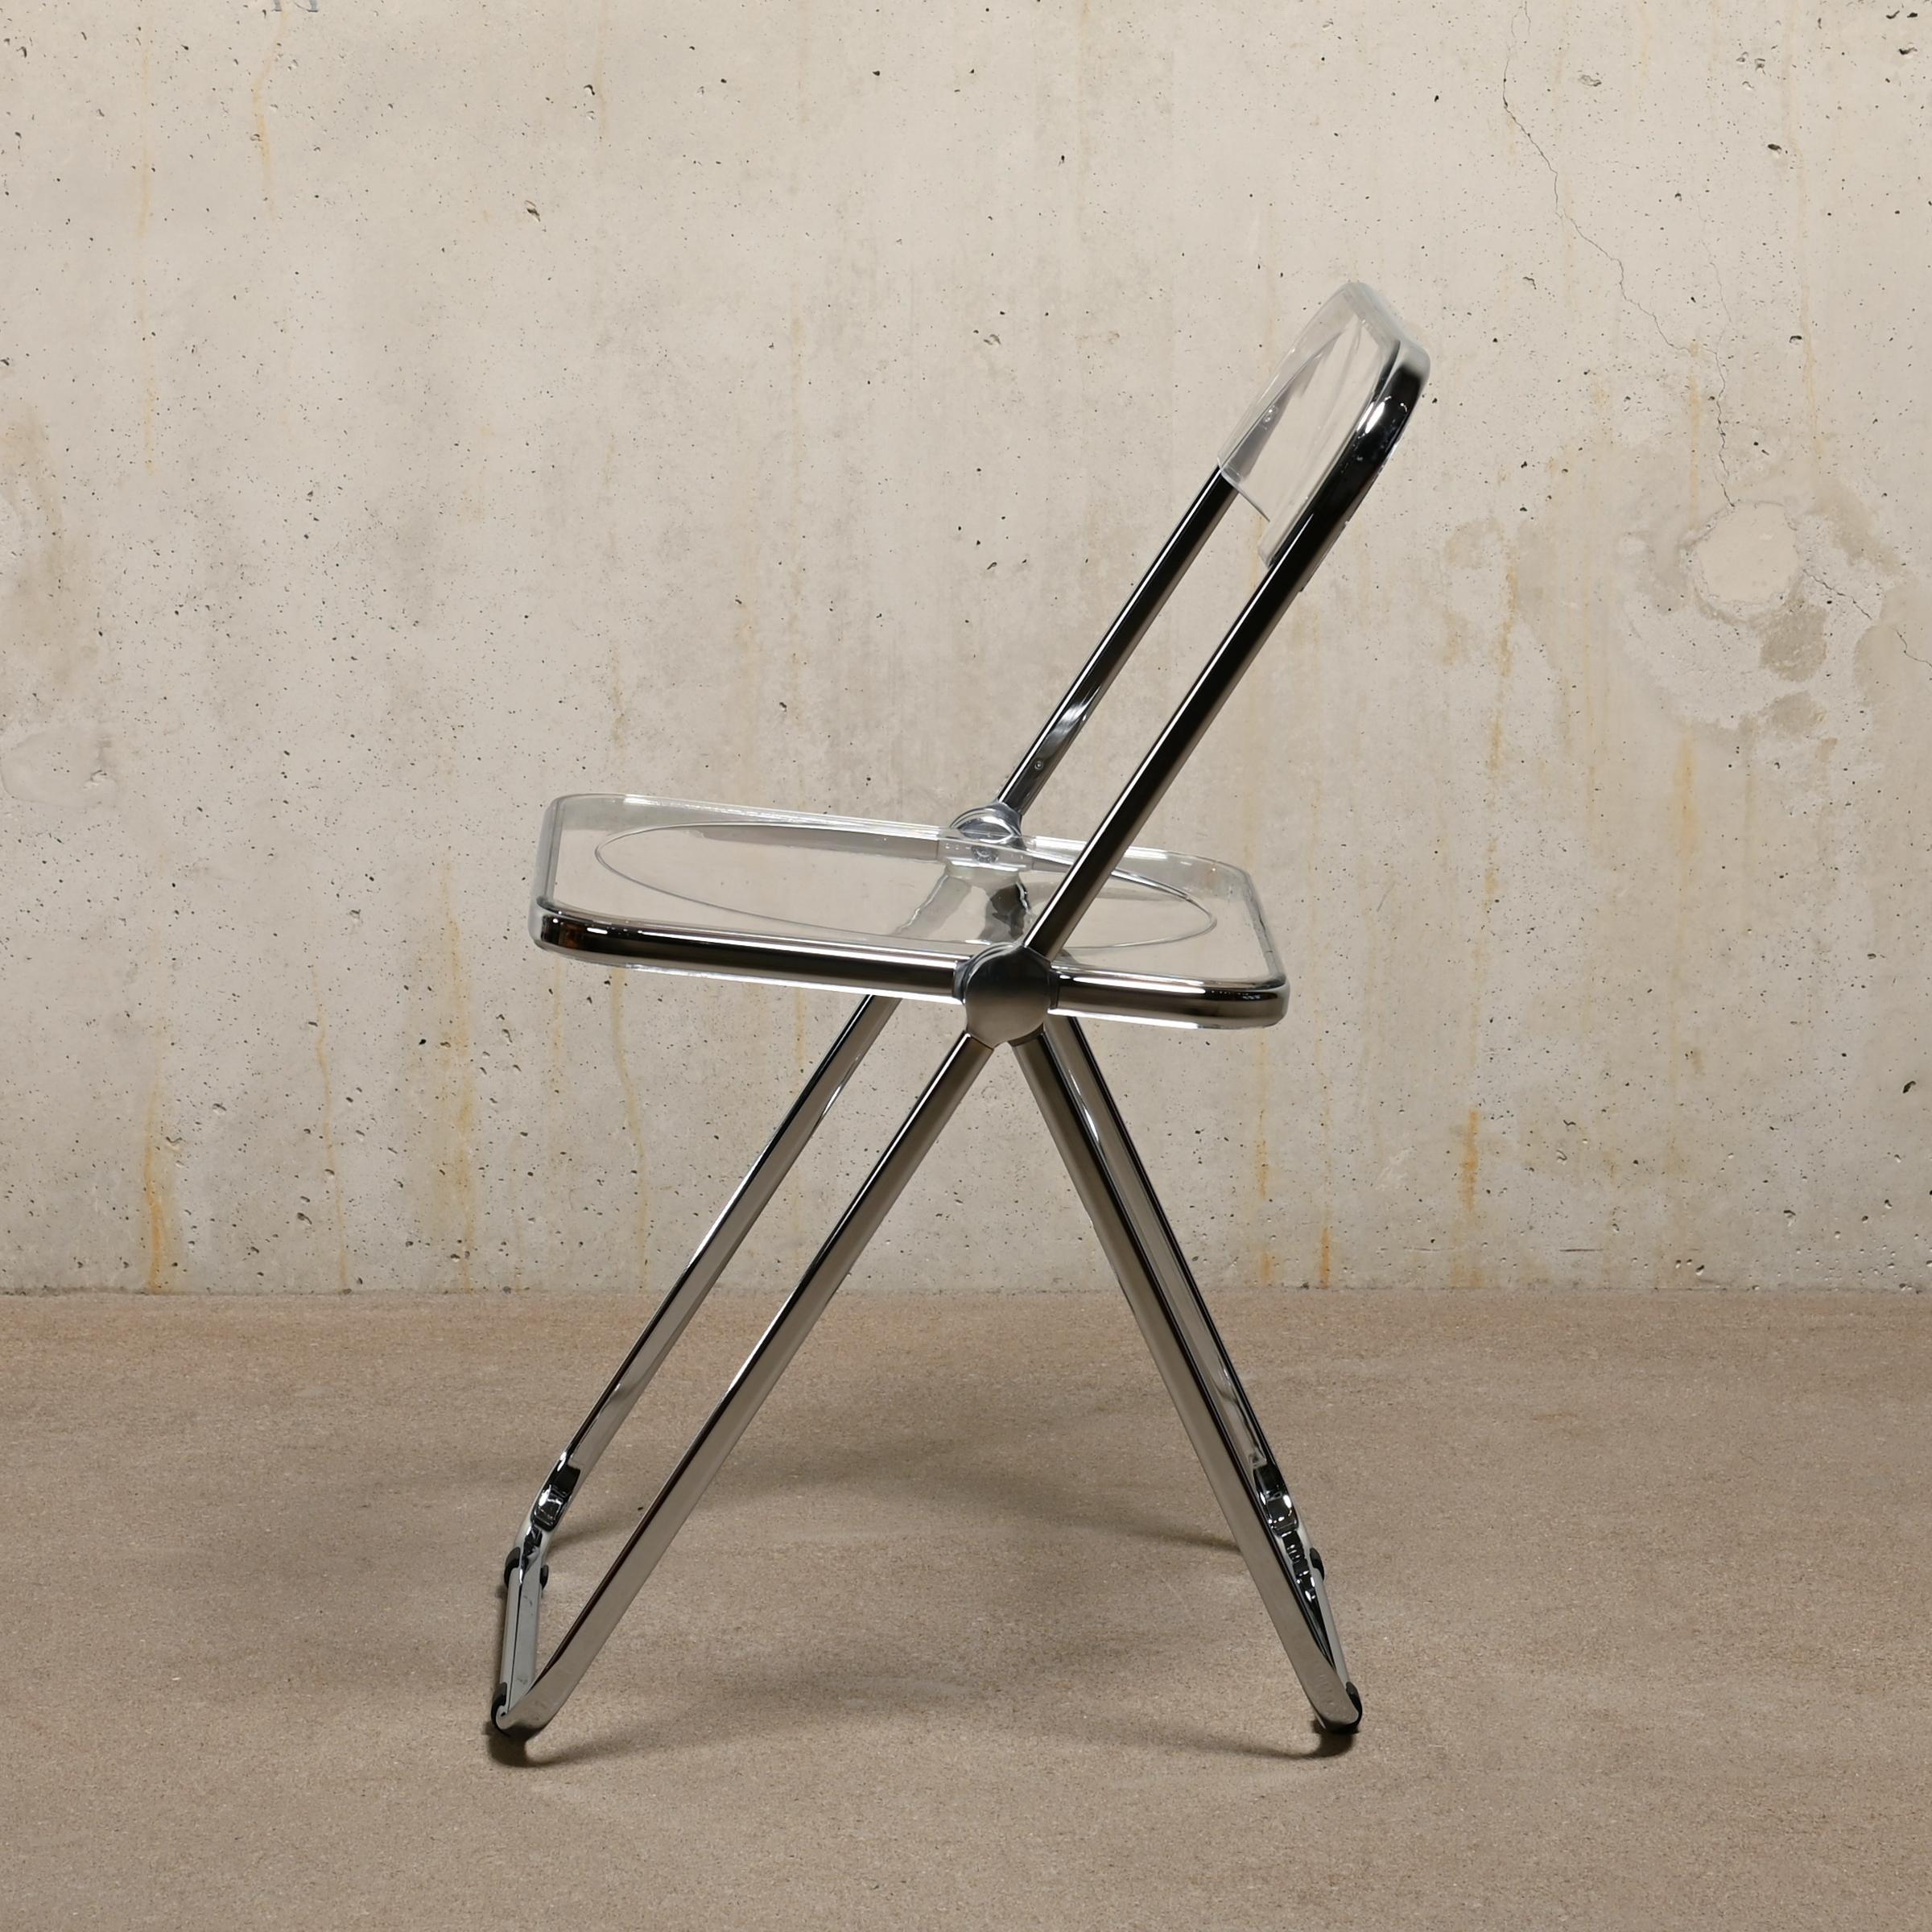 The Plia folding chair is an inventive and beautiful design by Giancarlo Piretti for Castelli in 1967, Italy. This icon is included in every standard publication on 20th century (furniture) design. It has a simple folding mechanism so the chair can